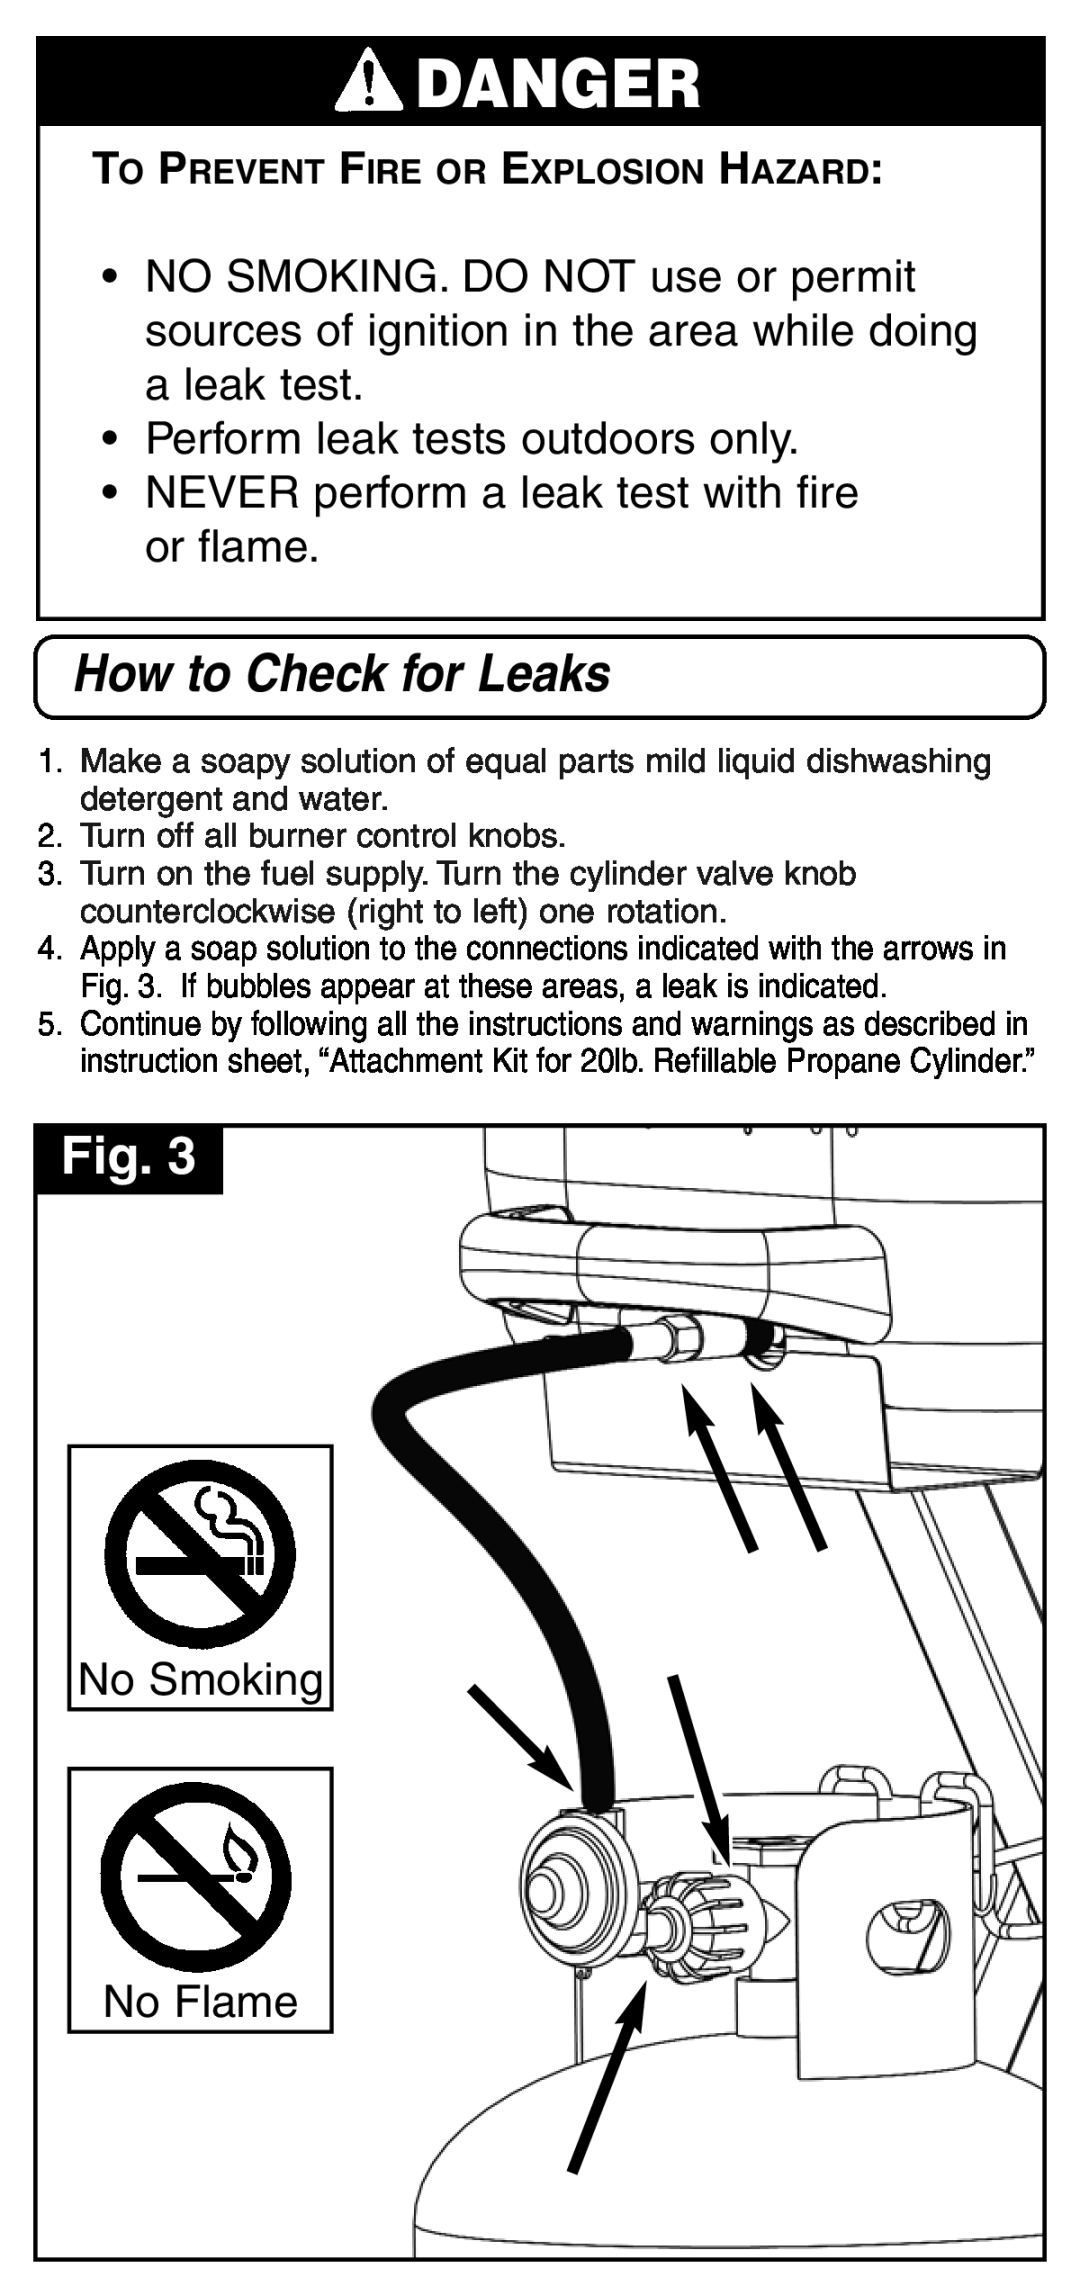 Coleman 9928 Perform leak tests outdoors only, NEVER perform a leak test with fire or flame, No Smoking No Flame, Danger 